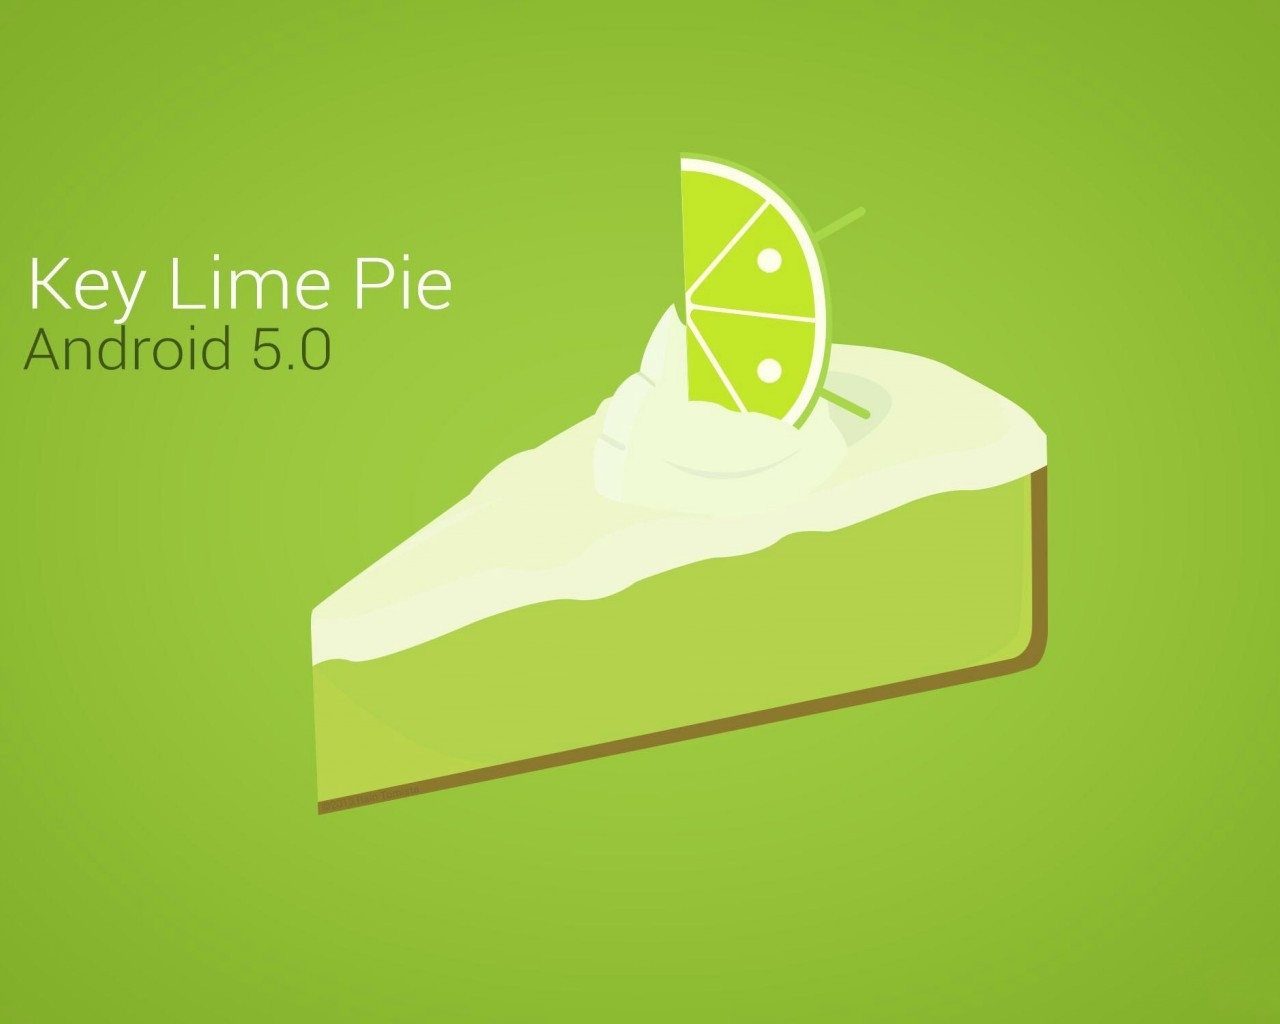 Android 5.0 for 1280 x 1024 resolution